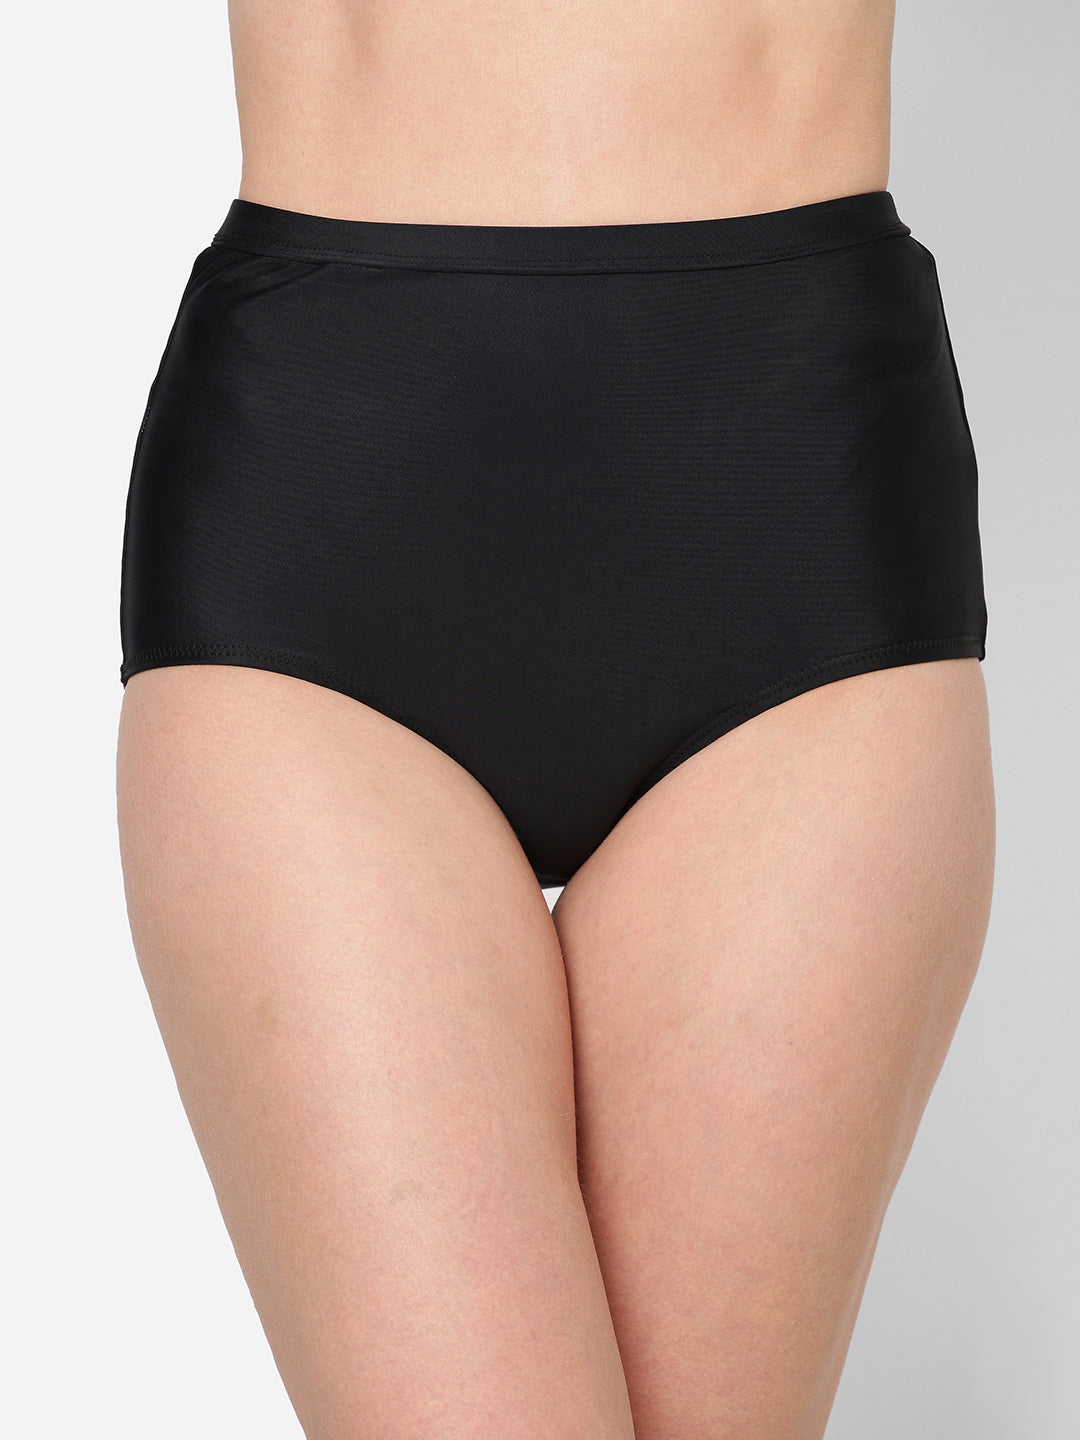 women is wearing black high waist bikini bottoms with full coverage at the back